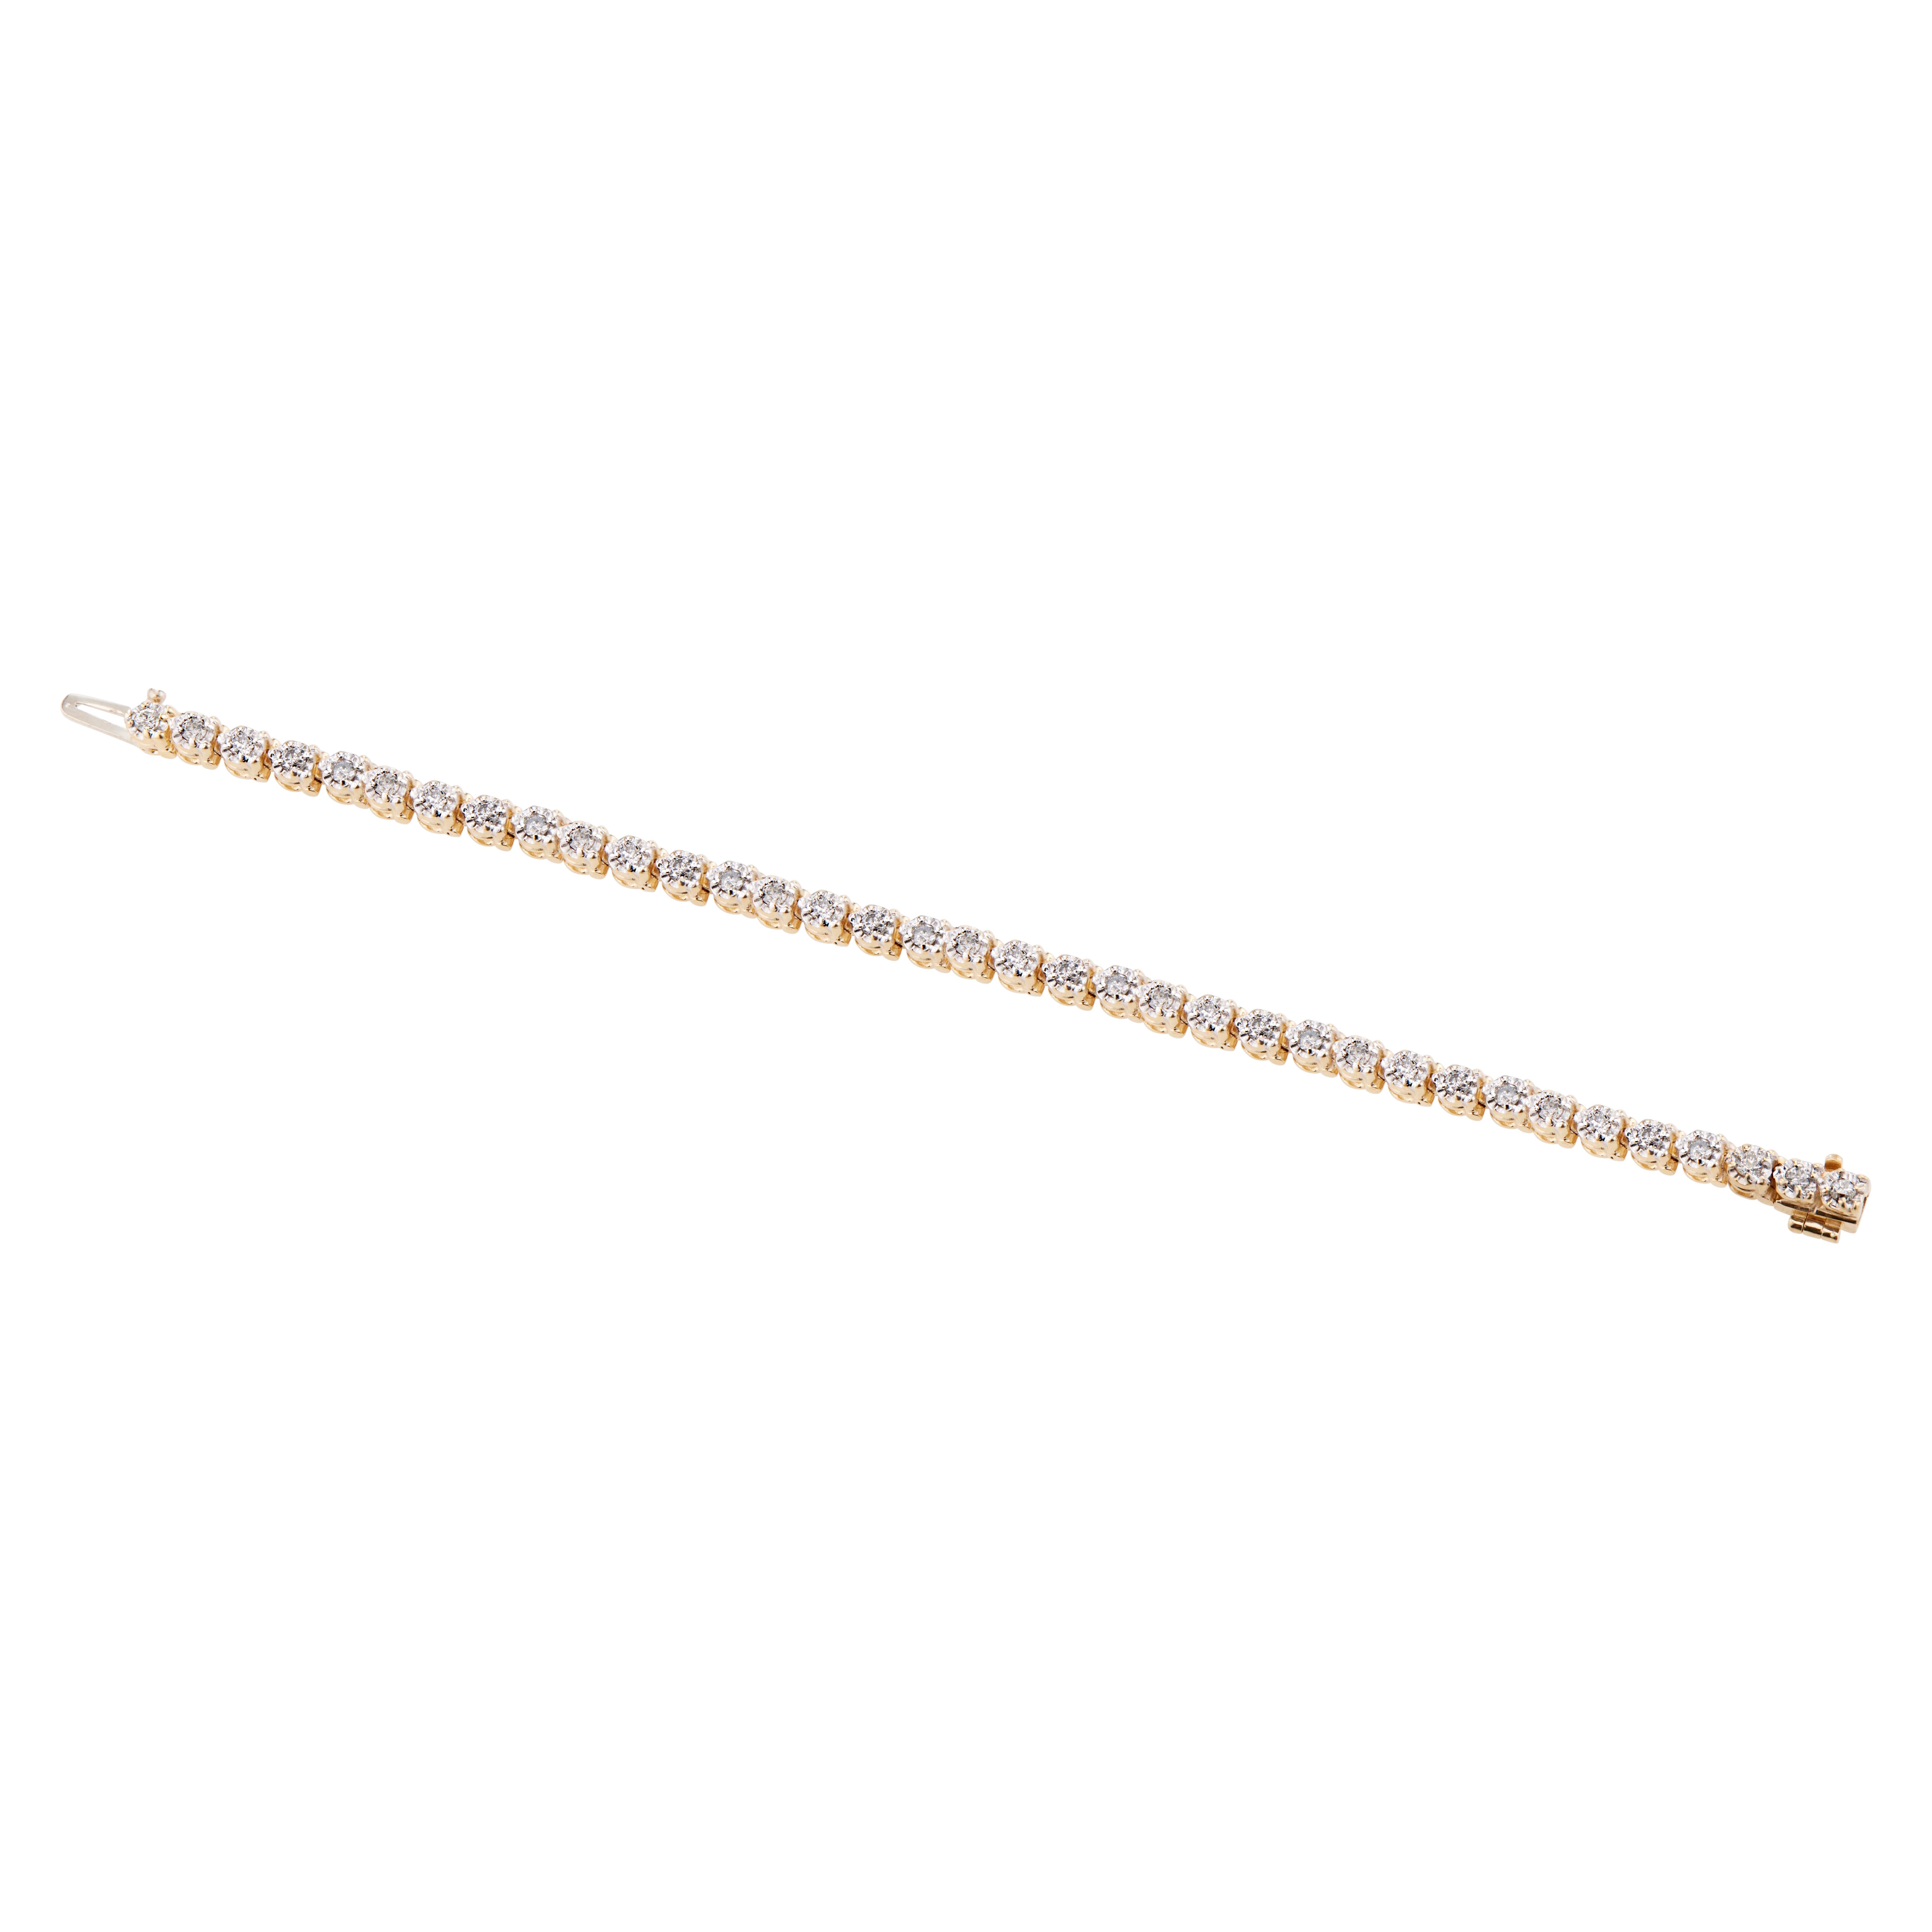 Ladies diamond hinged link tennis bracelet. 41 round diamonds set in 14k gold with built in hidden catch and underside safety. 7 inches long. 

41 round brilliant cut diamonds, H-I I approx. 1.25cts
14k yellow gold 
Stamped: 14k
13.6 grams
Bracelet: